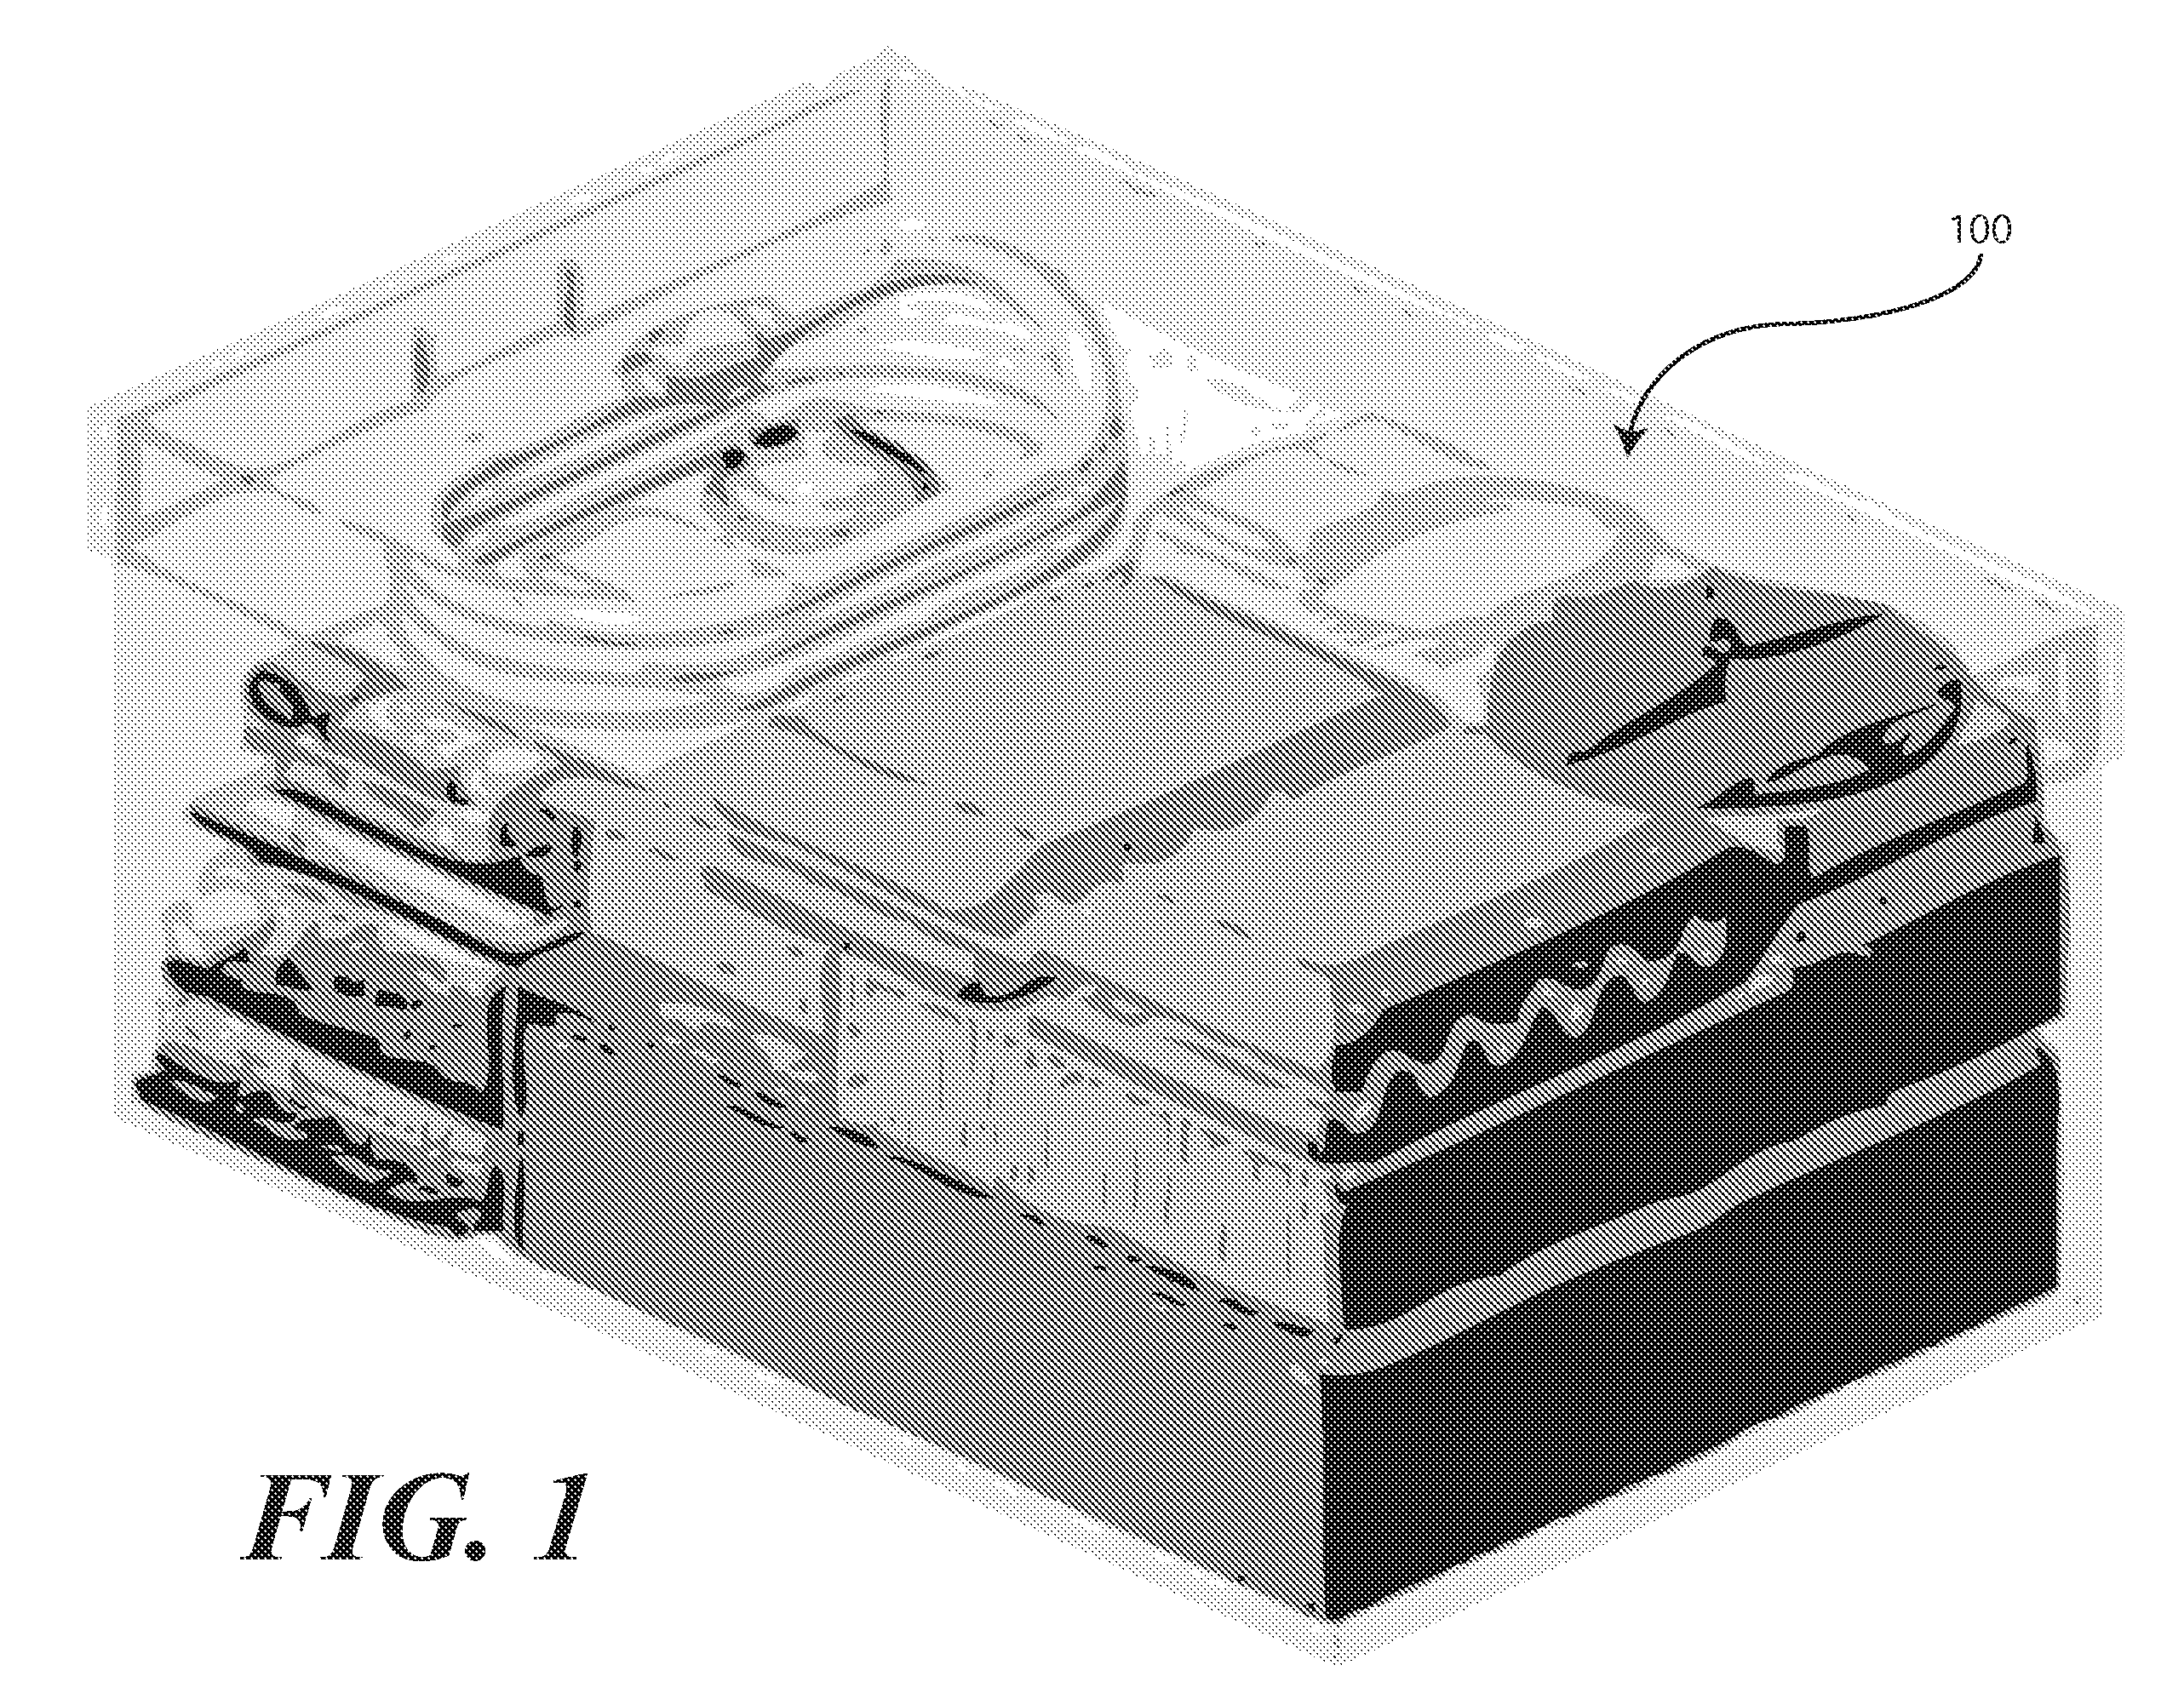 System and Method for Surgical Pack Manufacture, Monitoring, and Tracking